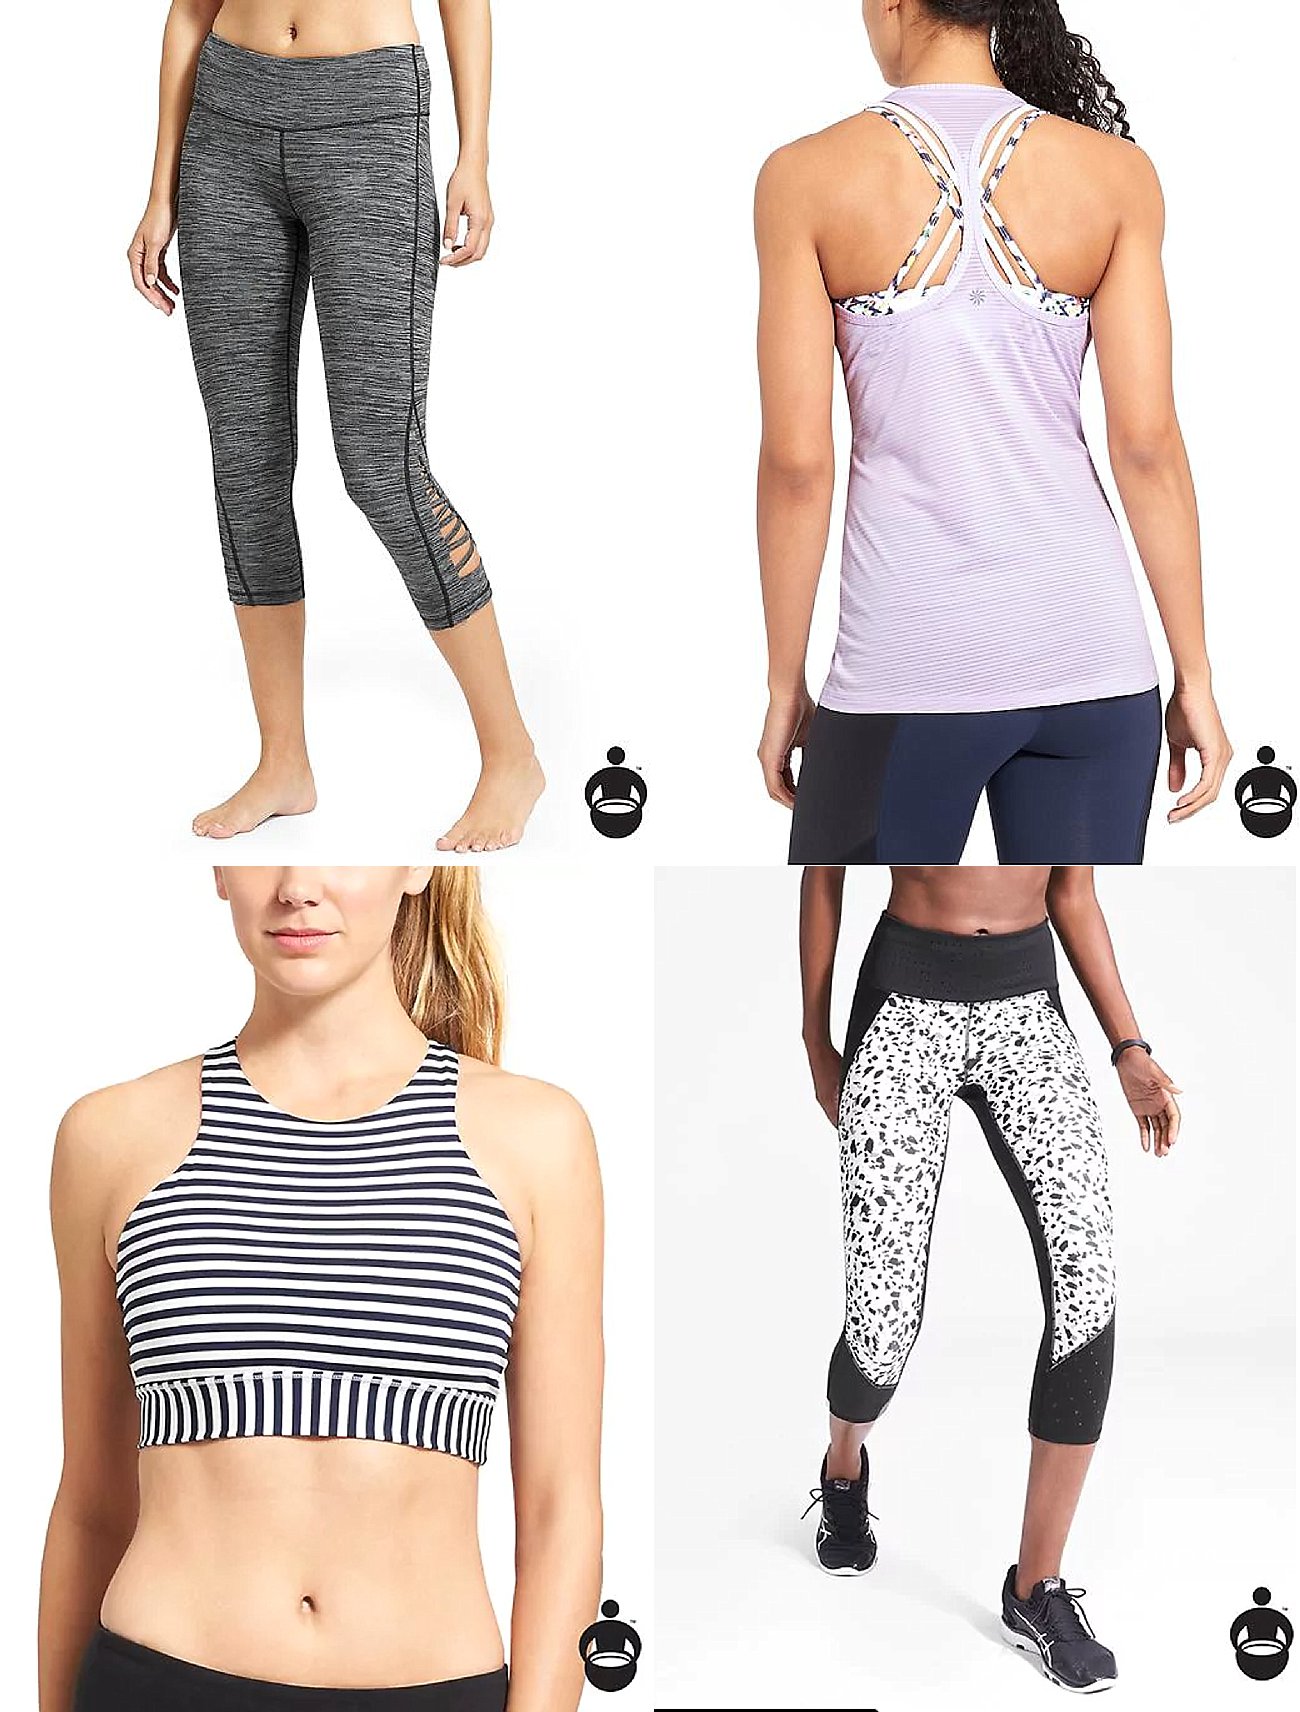 The Best Ethically Made and Fair Trade Athletic Wear and Activewear by ethical fashion blogger Still Being Molly